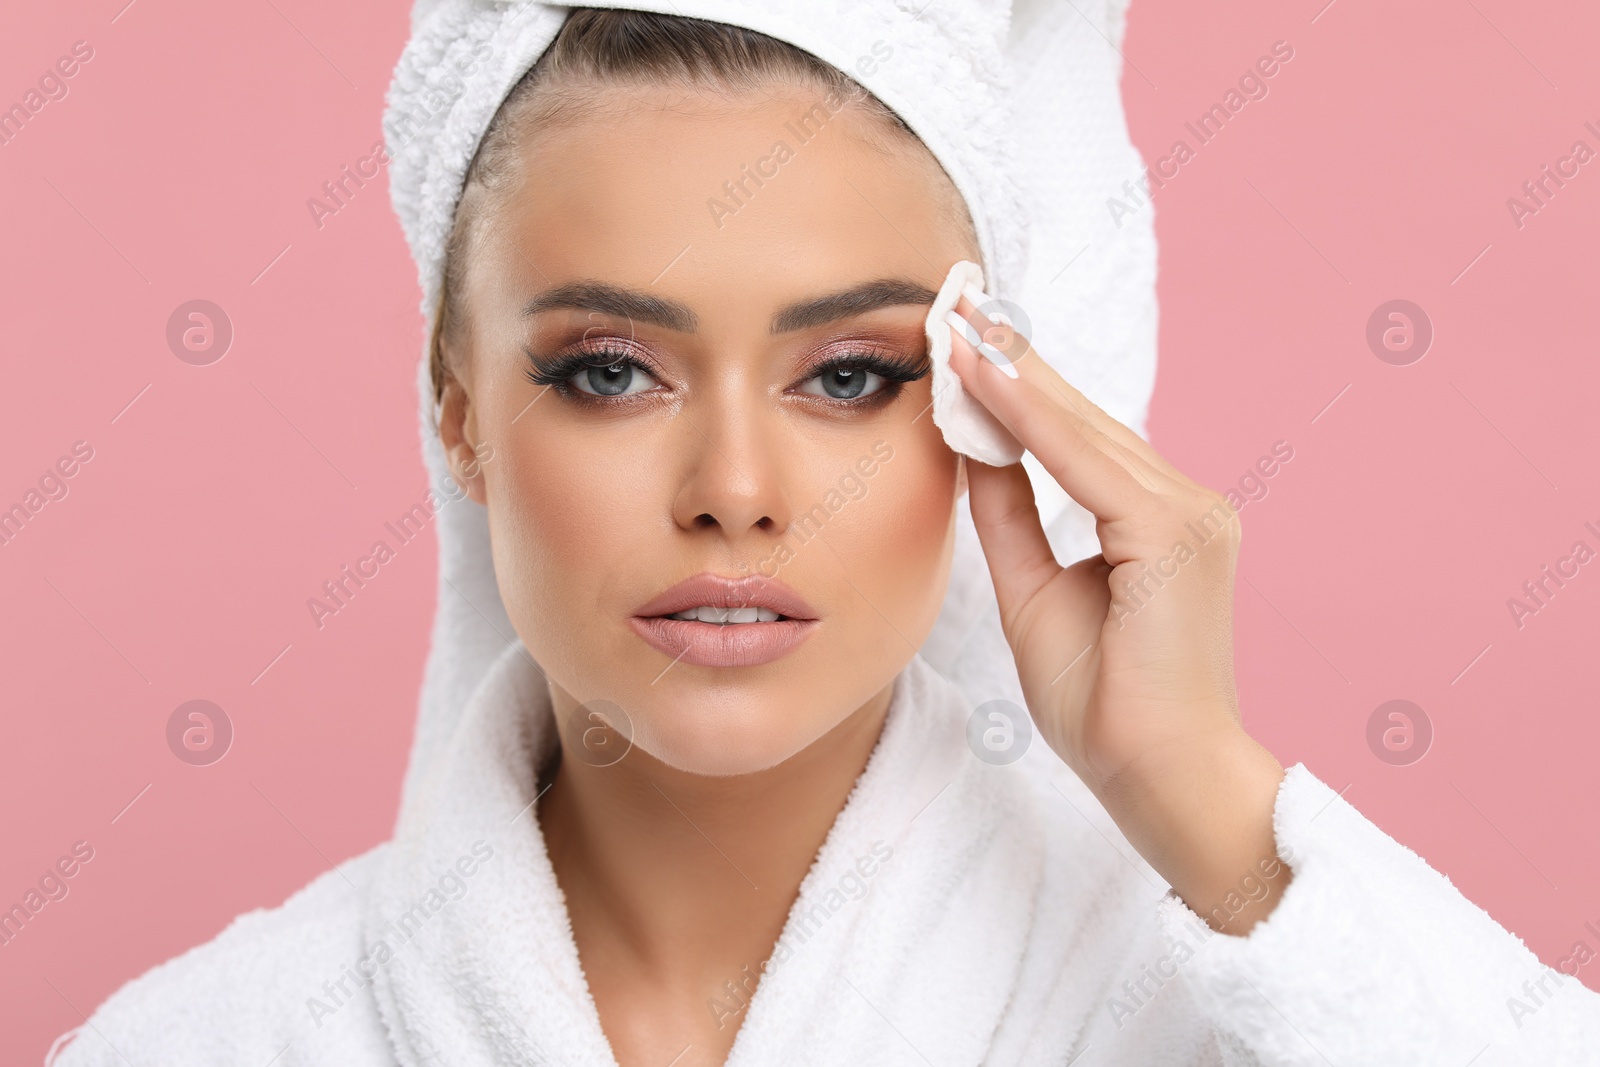 Photo of Beautiful woman removing makeup with cotton pad on pink background